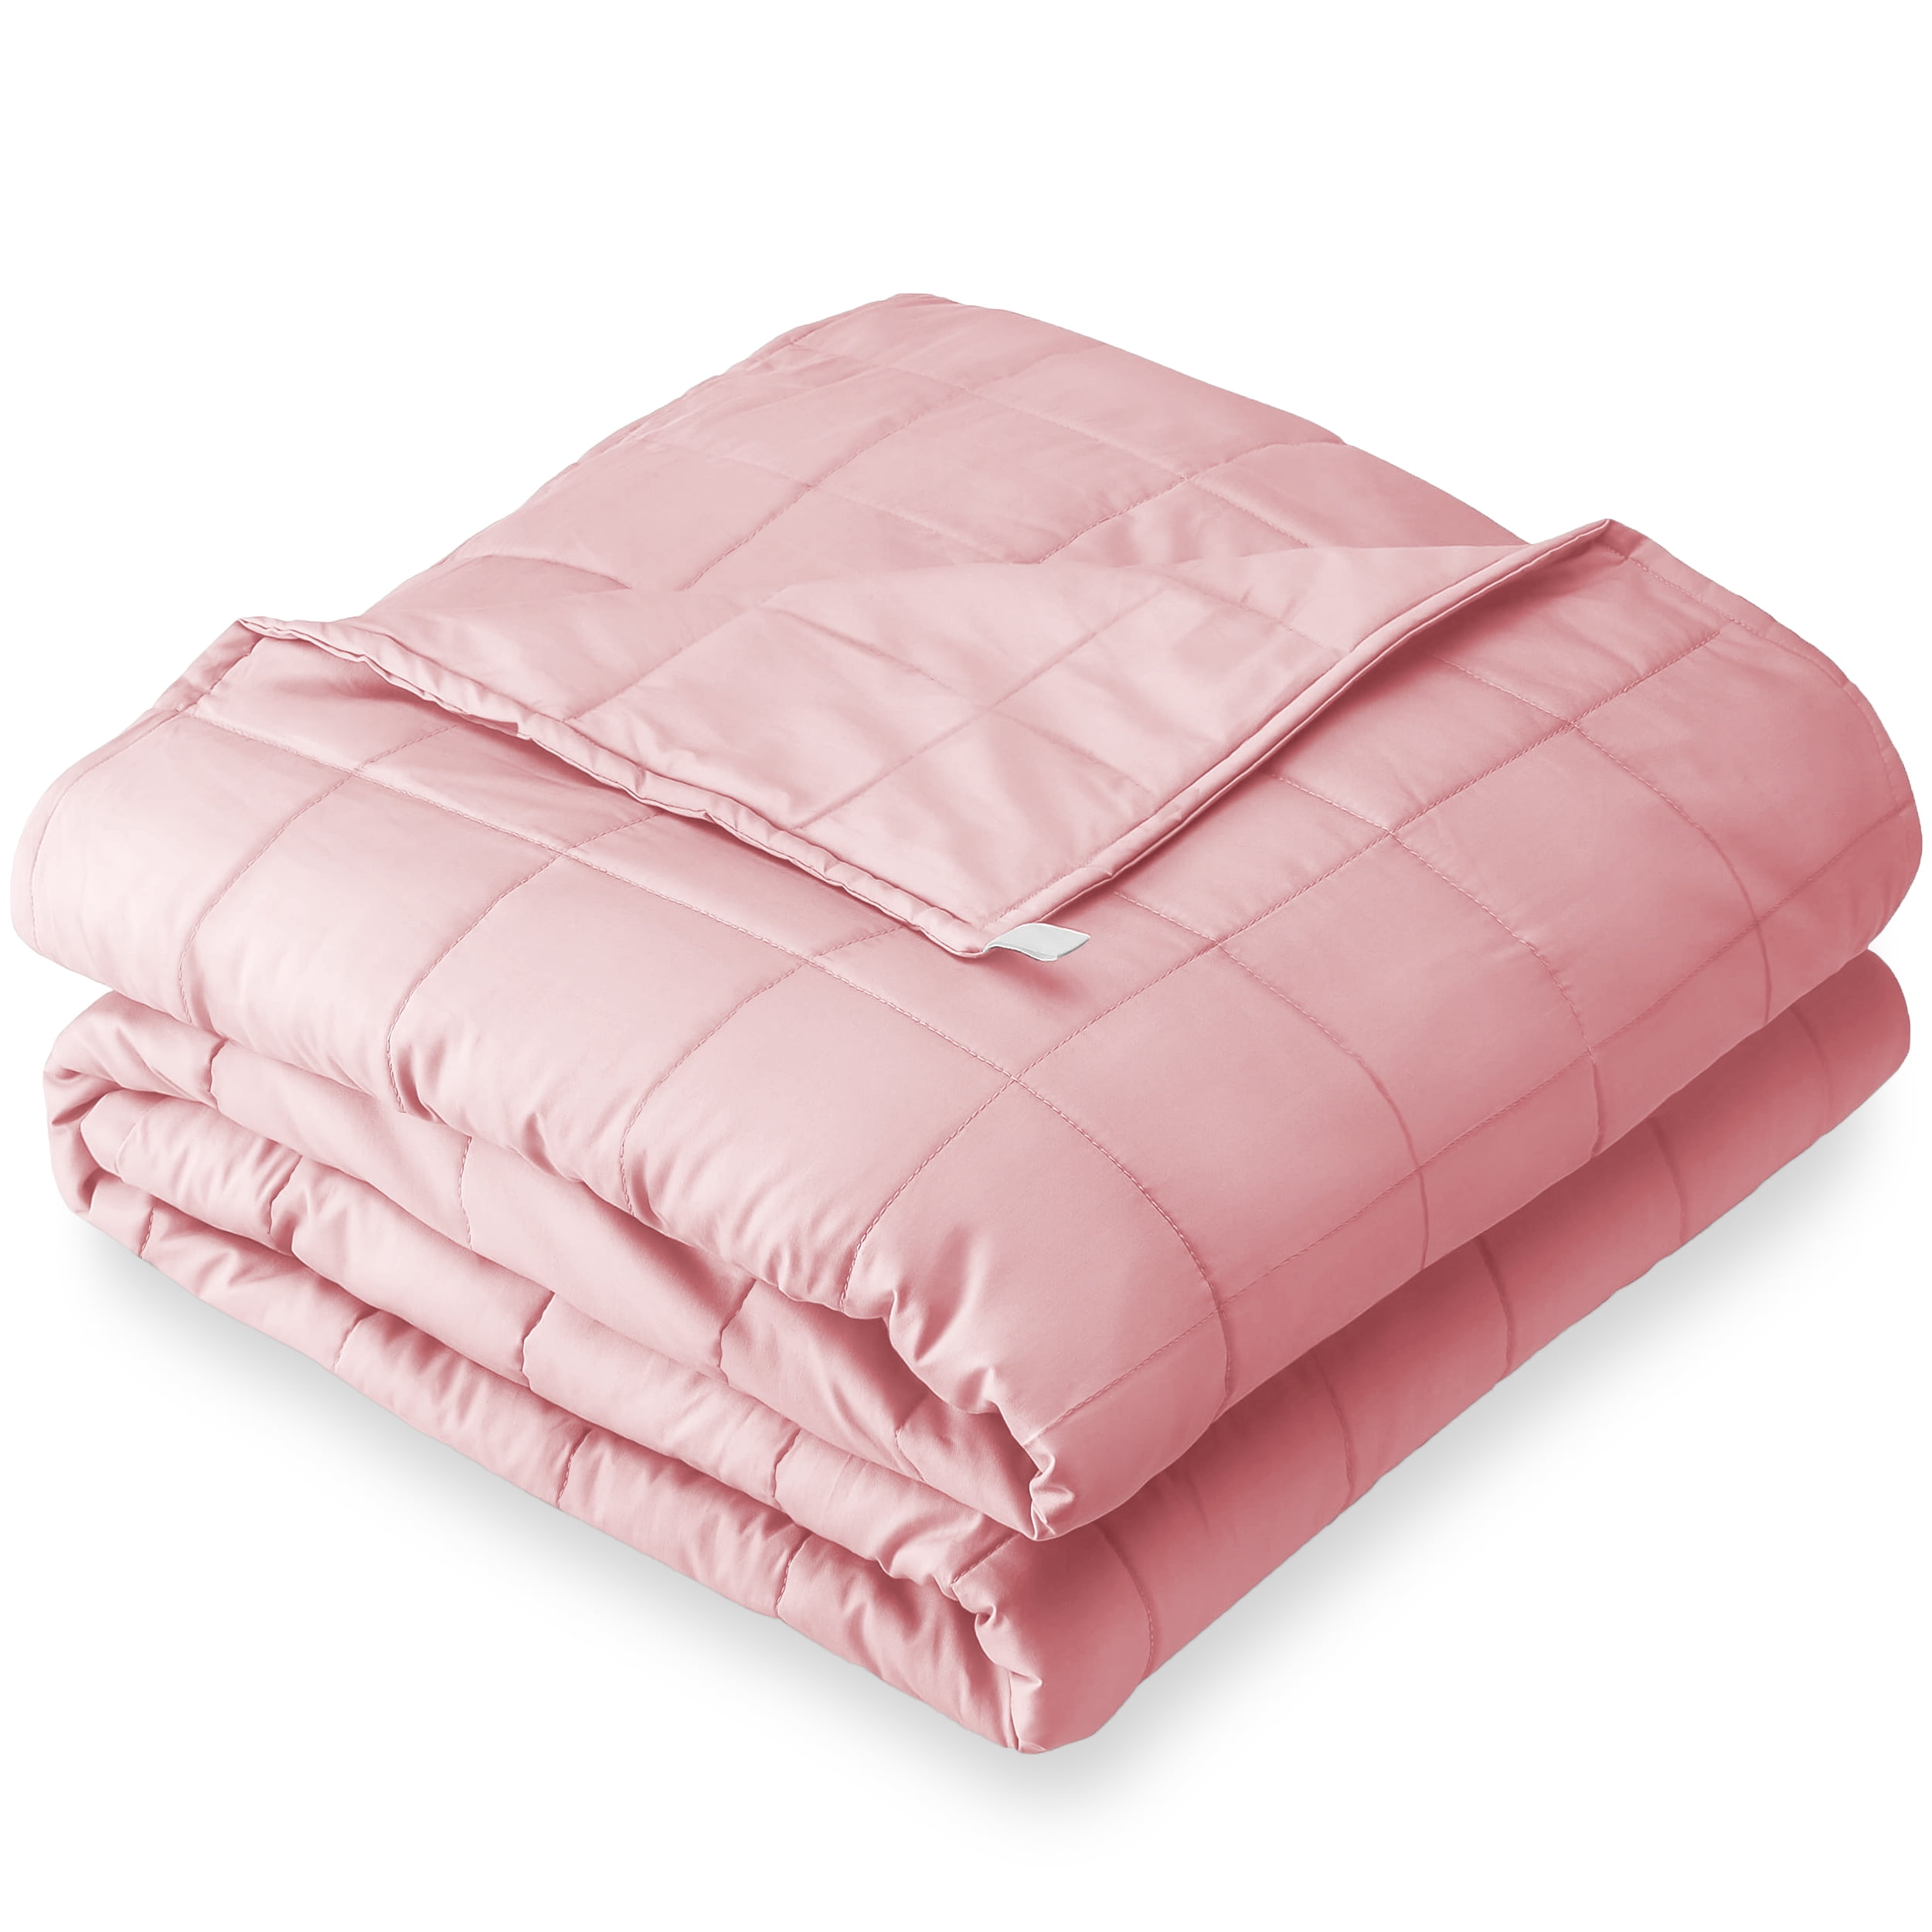 Bare Home Weighted Blanket 10lb (40"x60"), Heavy Blanket Throw Size for